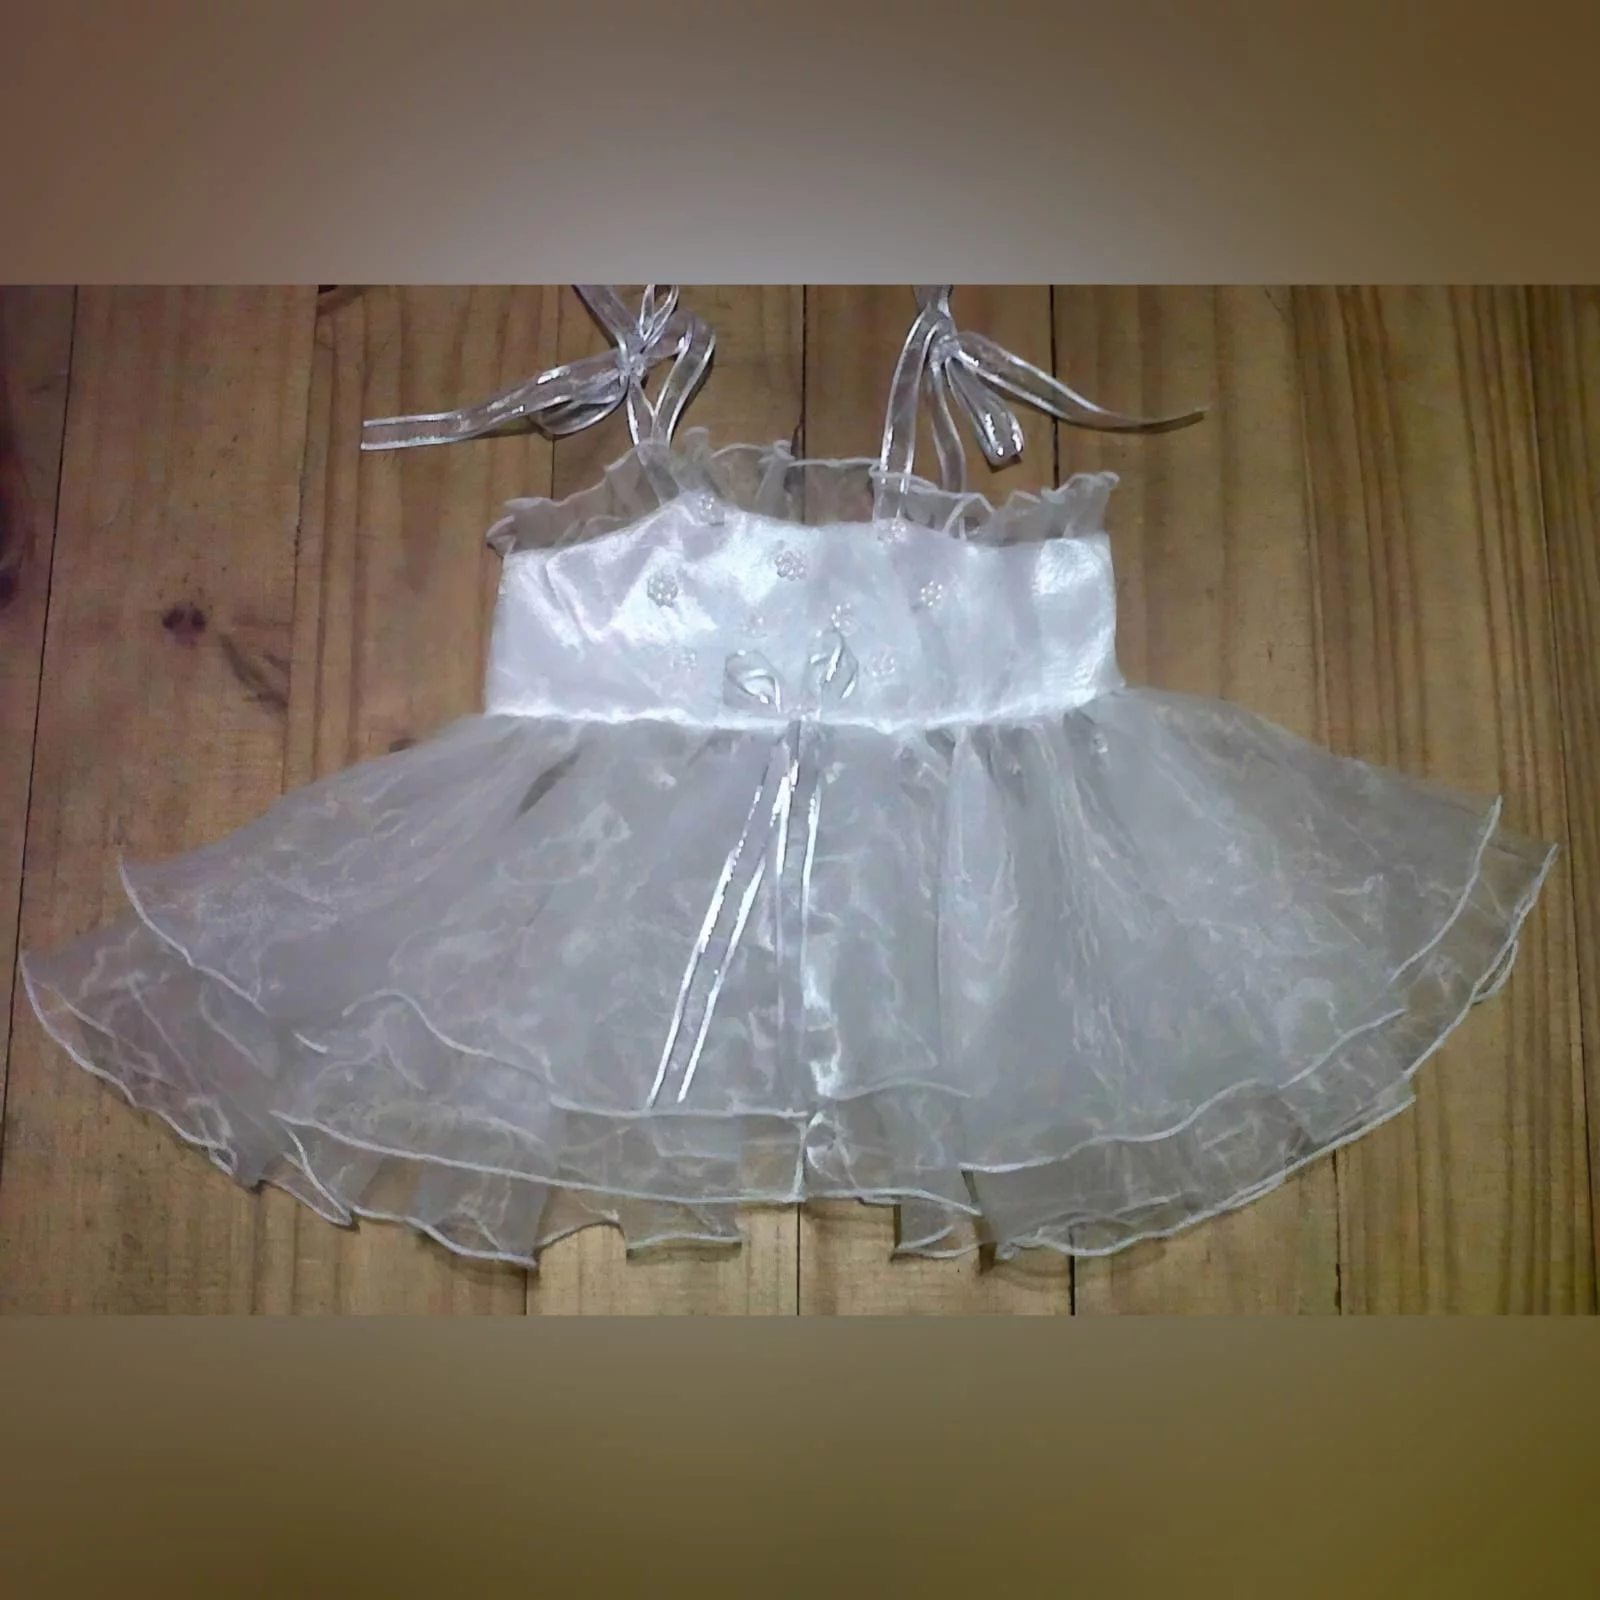 White bridal organza baptism dress 2 baptism dress made with satin and organza with pearl details and silver edged ribbon, with a frill on the neckline